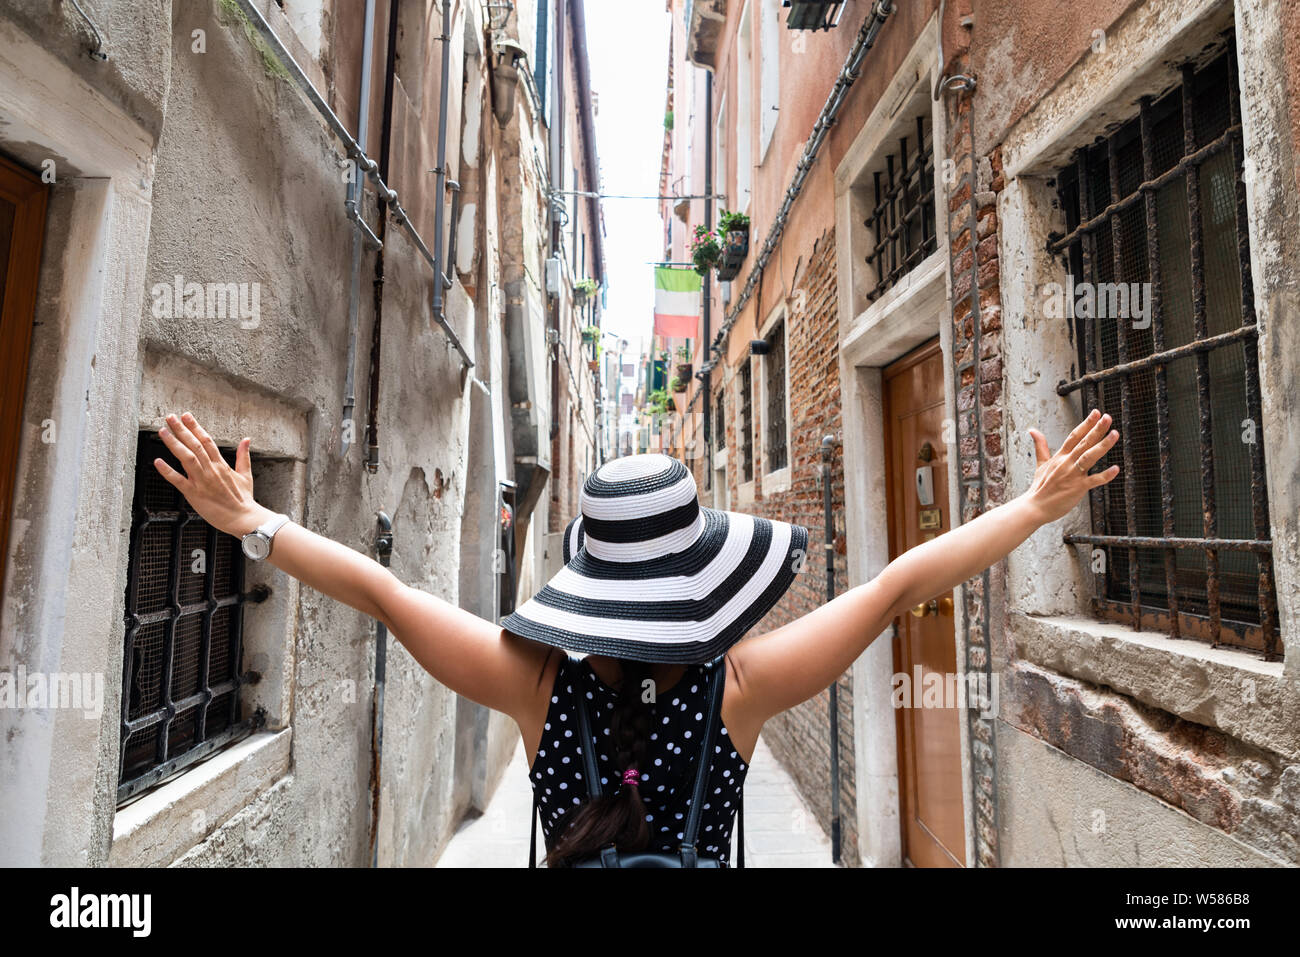 Rear View Of Woman Wearing Stripes Hat With Her Arms Outstretched Standing In Narrow Alley Stock Photo